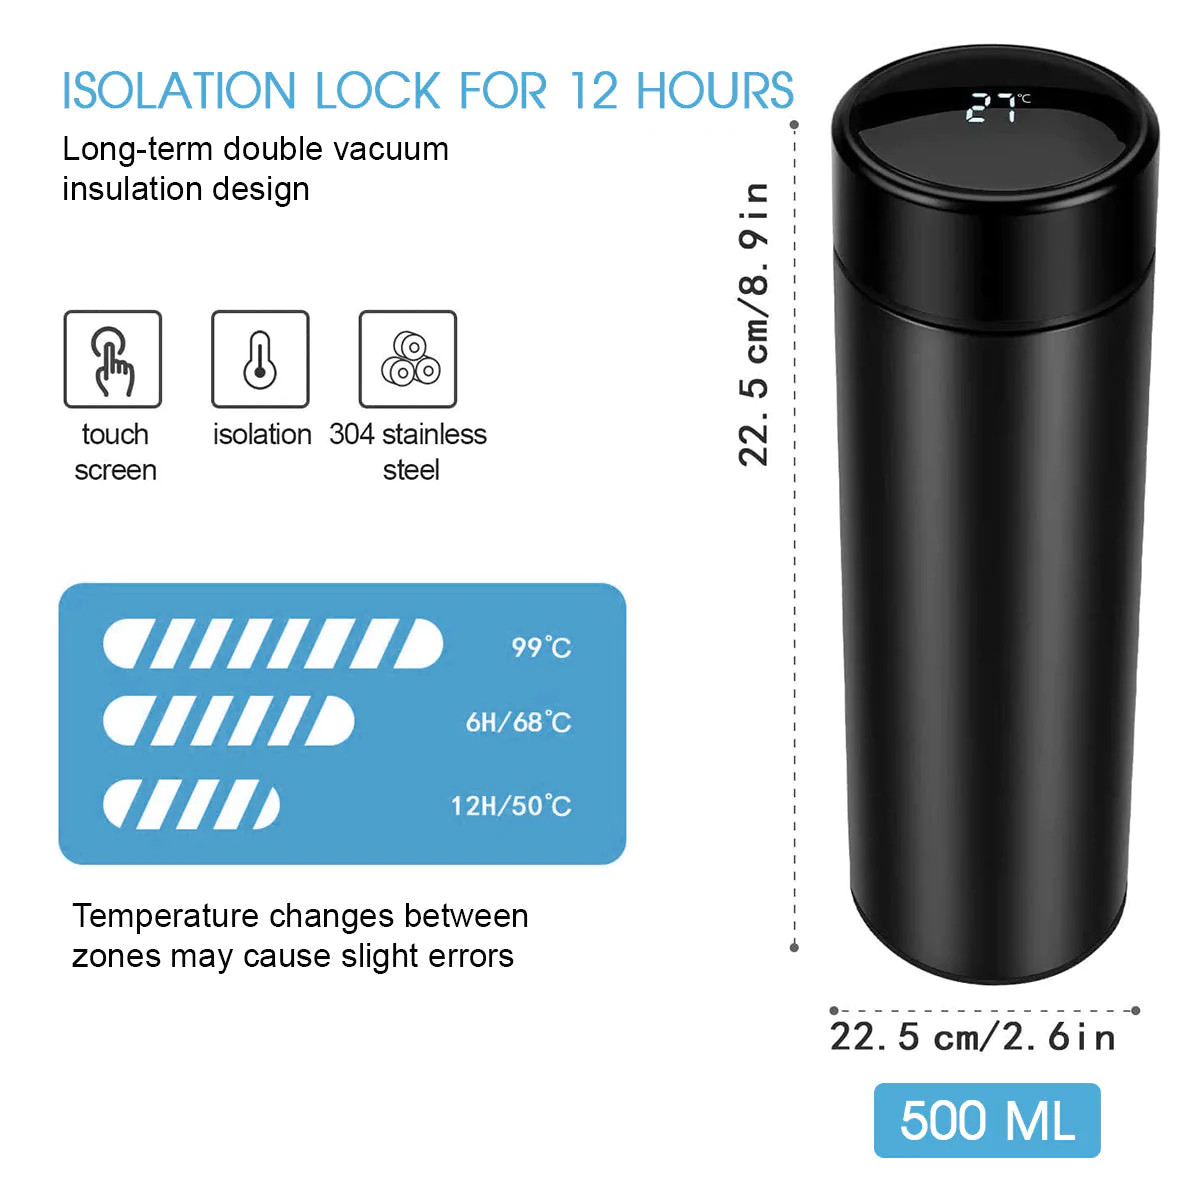 17oz Insulated Water Bottle with LED Temperature Display, Designed for Hyundai, Coffee Tea Infuser Bottle Double Wall Vacuum Insulated Water Bottle for Hot or Cold Drink, Stainless Steel Sports Automotive Travel Mug